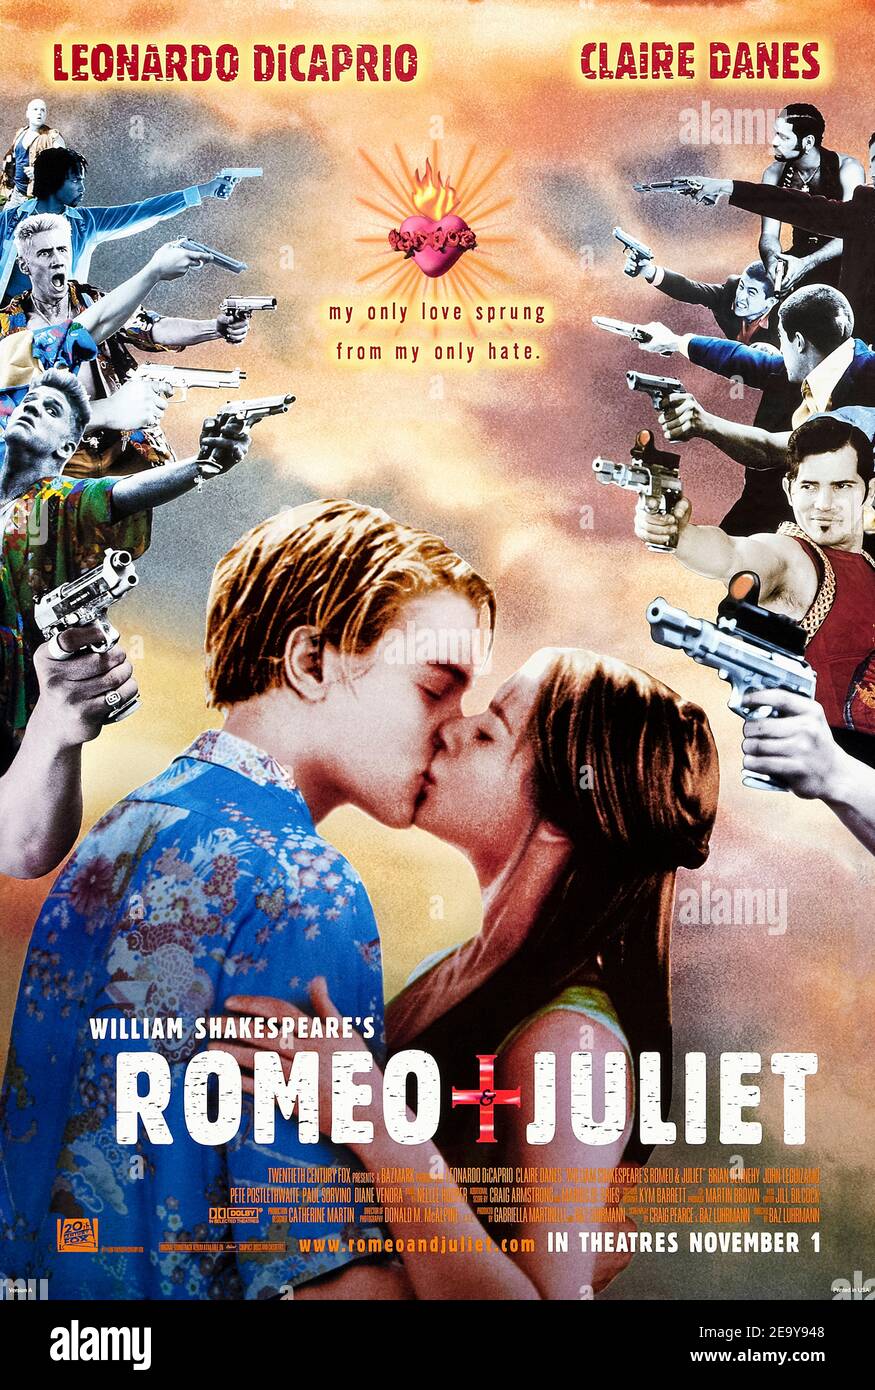 Romeo + Juliet (1996) directed by Baz Luhrmann and starring Leonardo DiCaprio, Claire Danes and John Leguizamo. Fantastic and fantastical adaptation of Shakespeare's play to a modern Verona whilst retaining the original language. Stock Photo